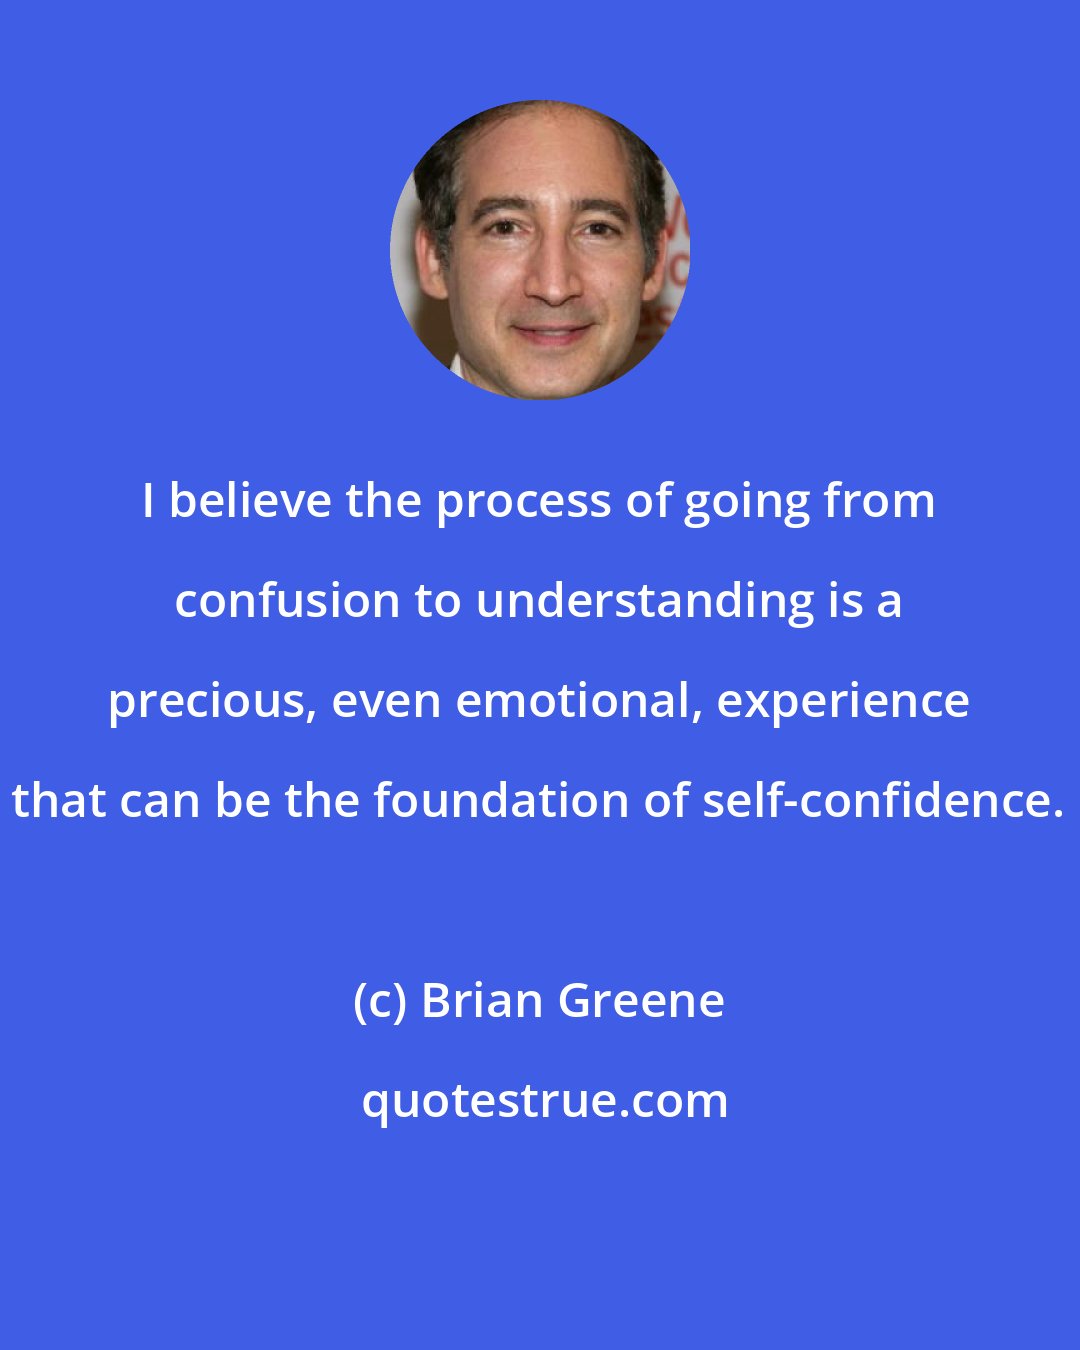 Brian Greene: I believe the process of going from confusion to understanding is a precious, even emotional, experience that can be the foundation of self-confidence.